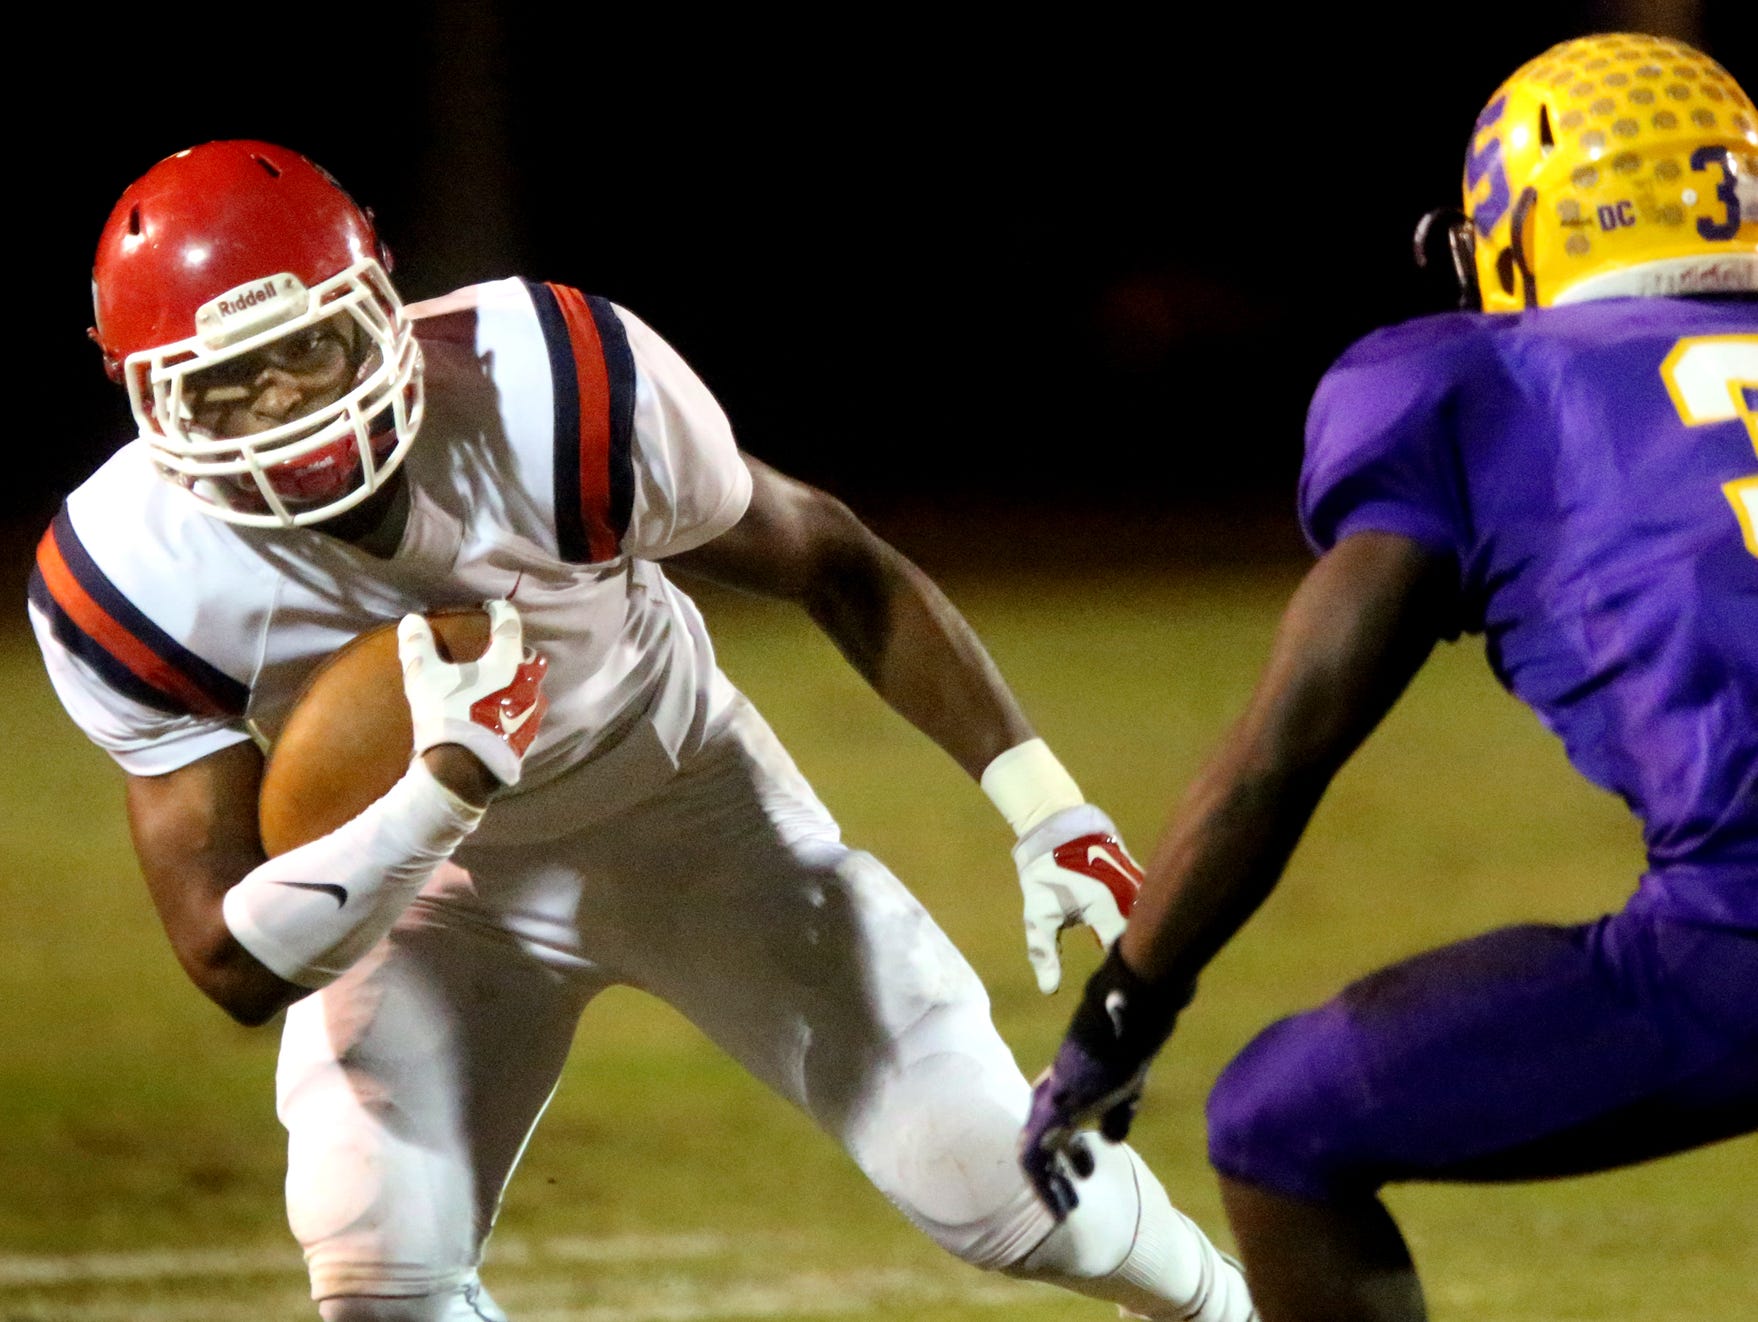 Oakland's JaCoby Stevens (7) runs the ball as Smyrna's AJ Carter (3) moves in to stop Stevens during the game at Smyrna, on Friday Oct. 30, 2015.